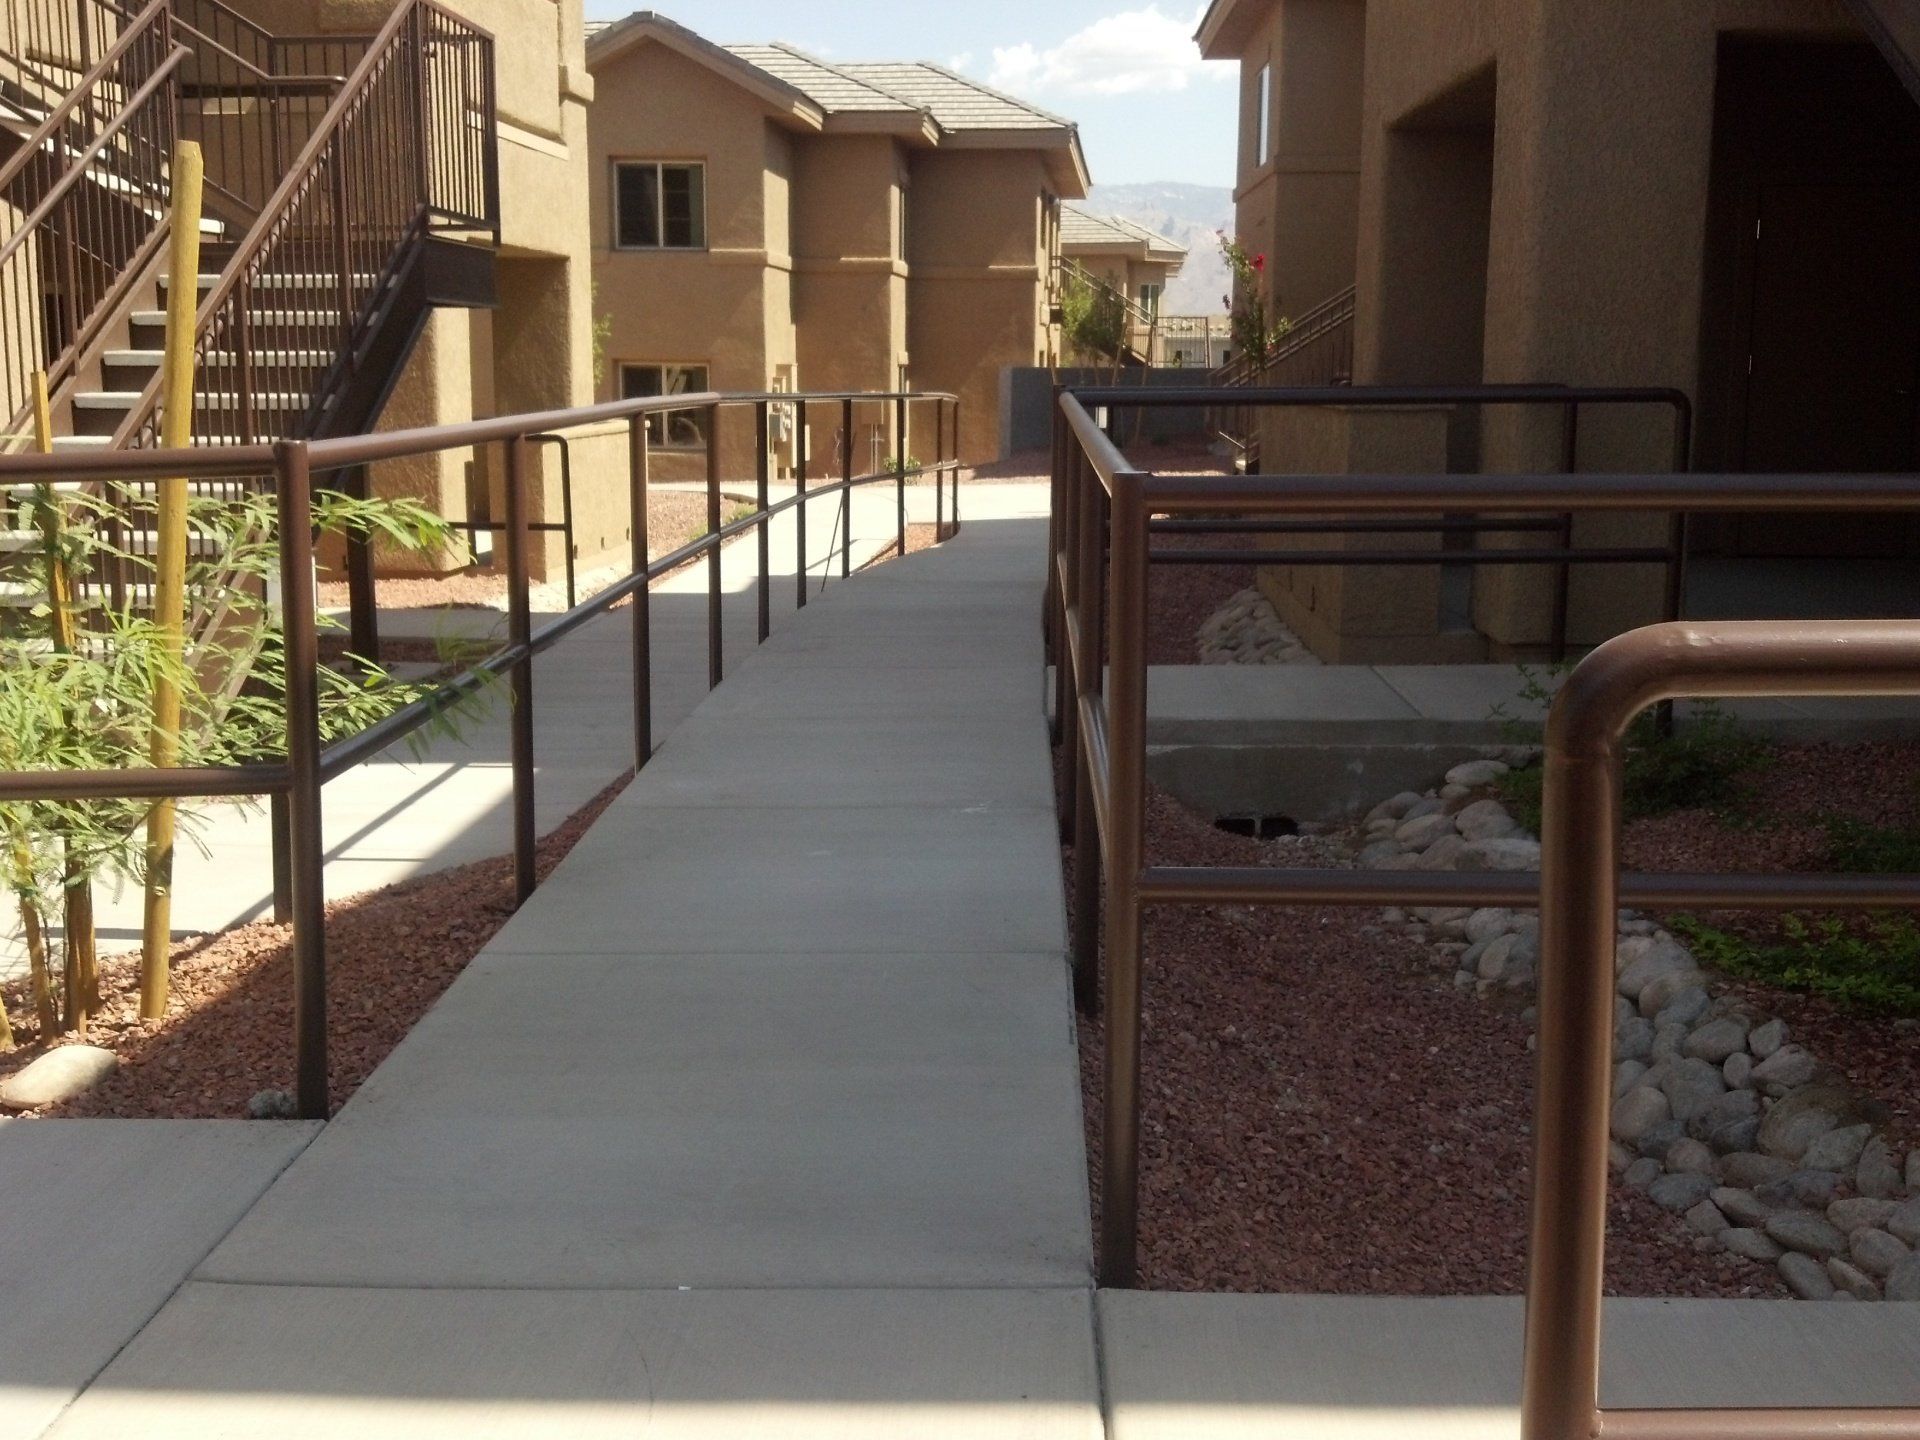 Dark wrought fence — Fence products in Tucson, AZ